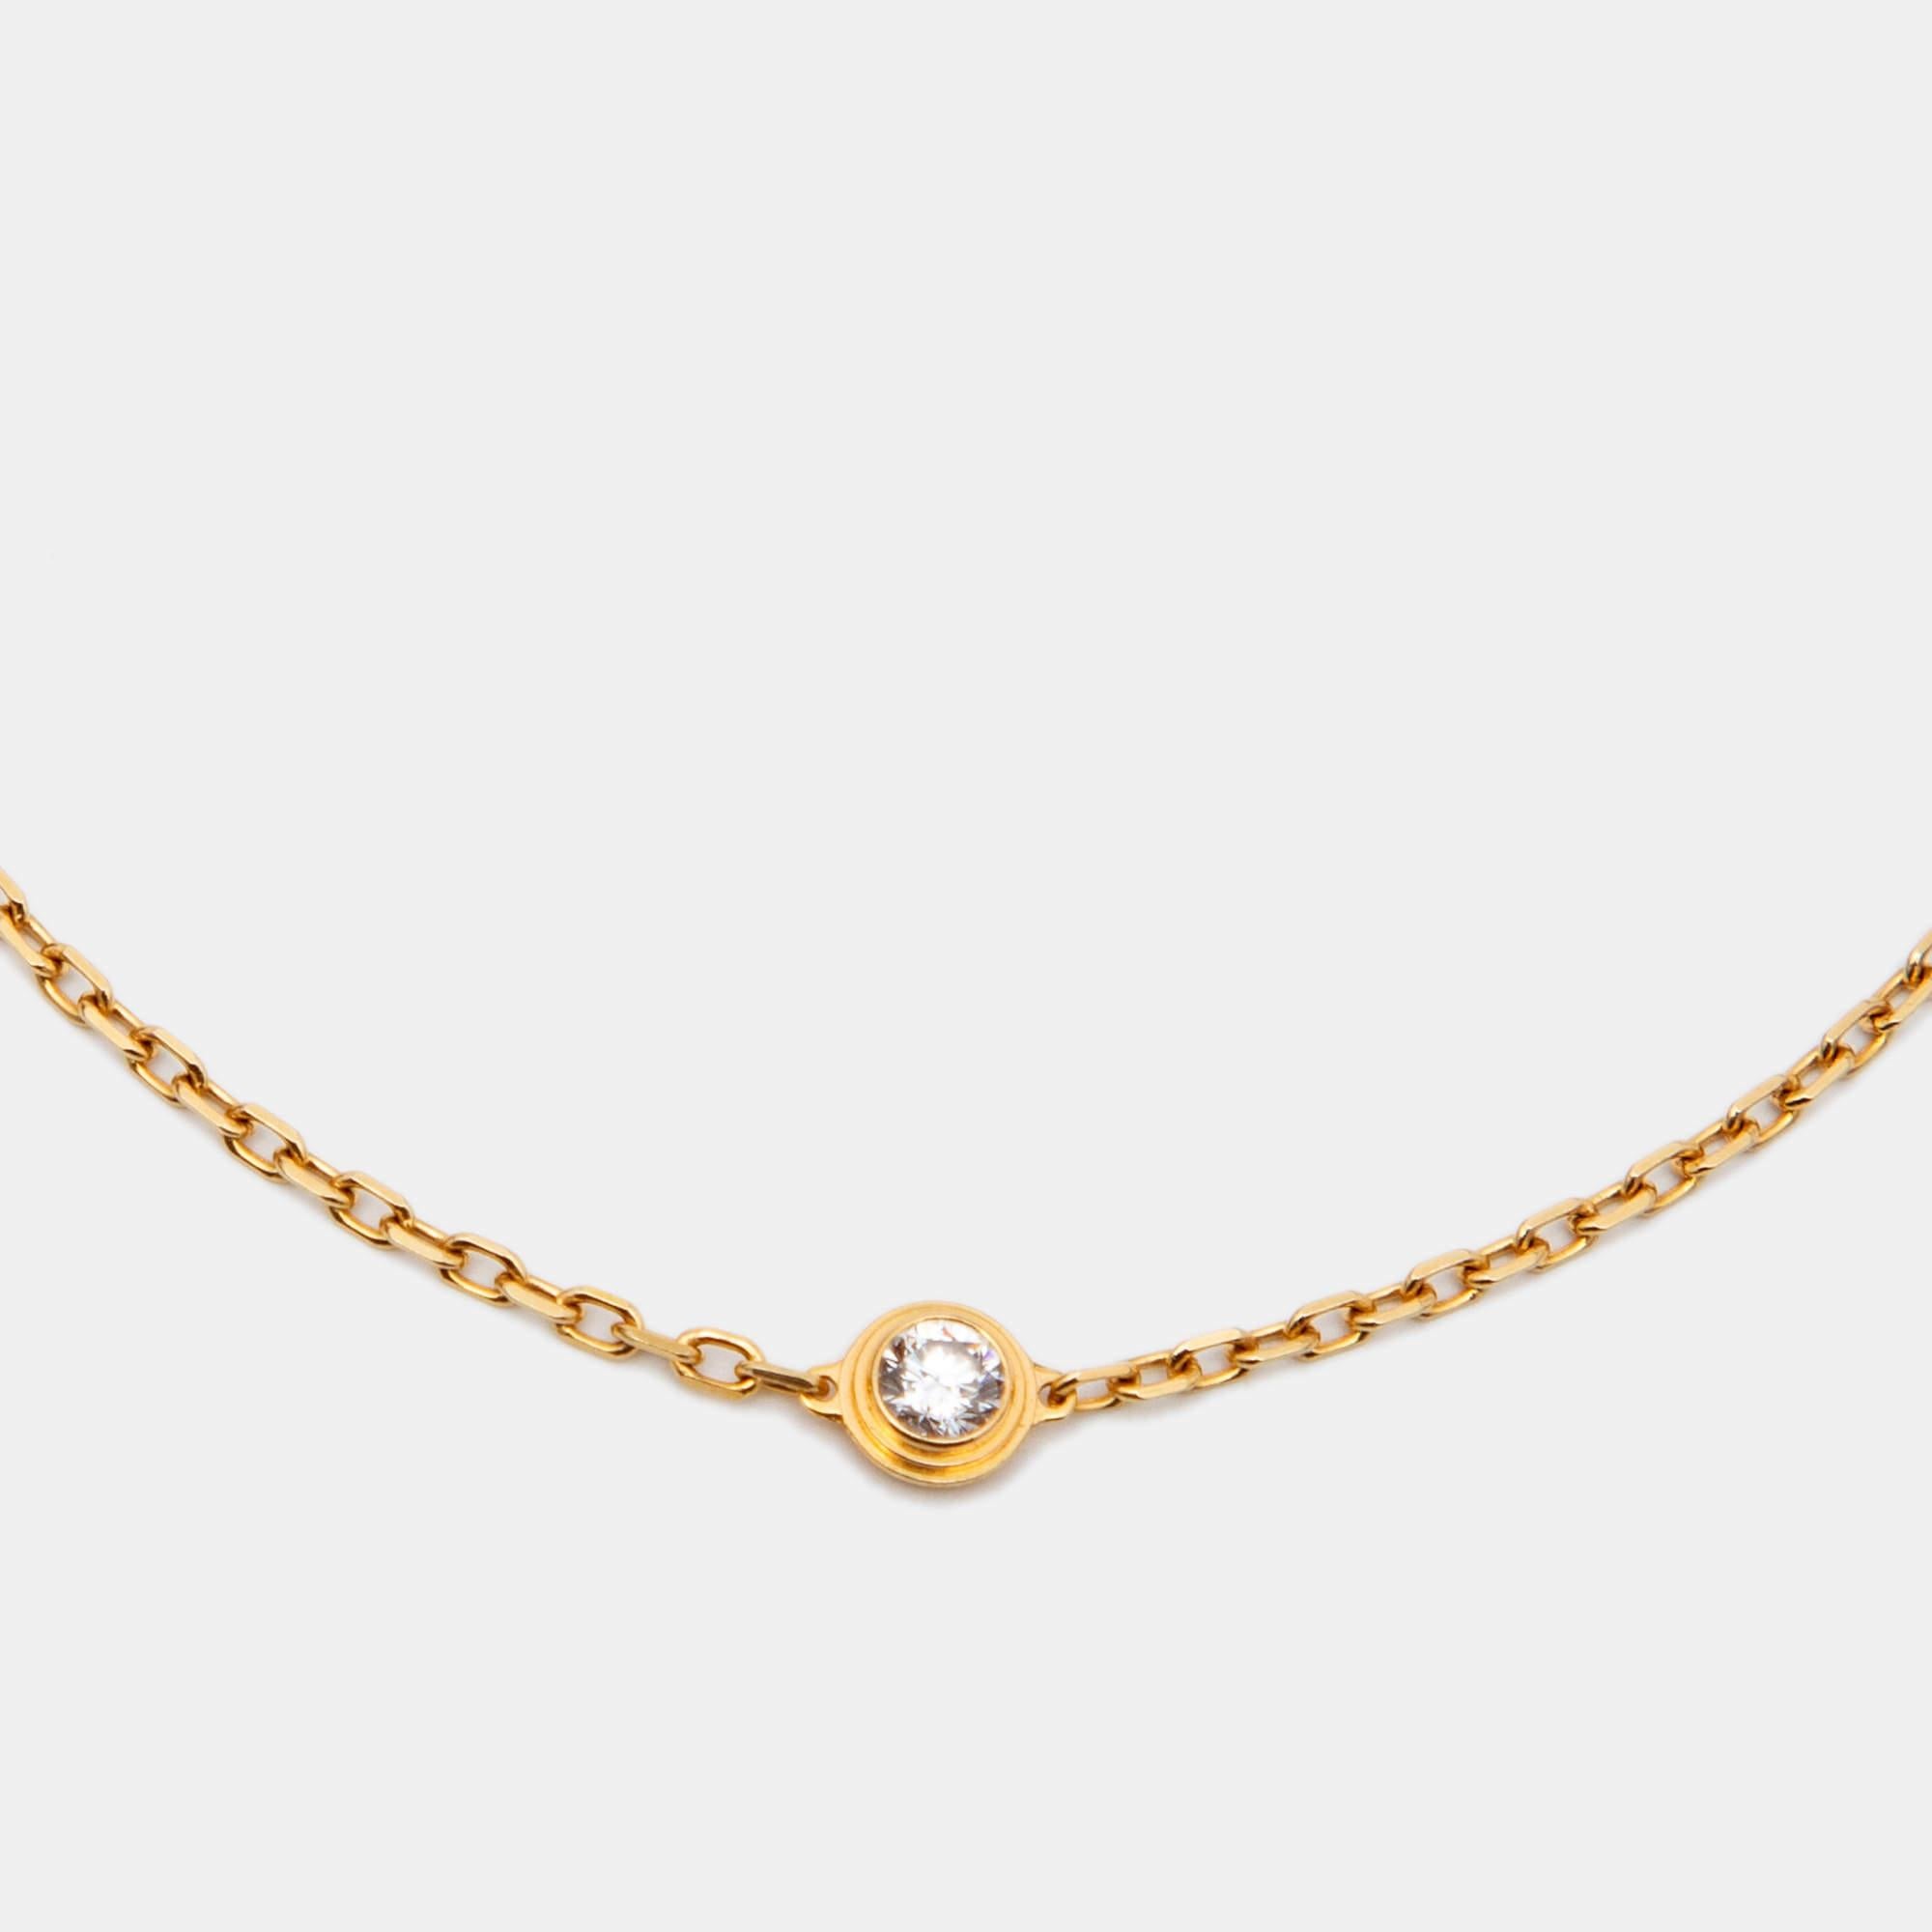 Cartier d'Amour collection has pieces designed with wearability in mind to act as everyday symbols of love. From that exclusive line comes this bracelet fashioned in 18k yellow gold. The delicate chain is secured by a lobster clasp and highlighted